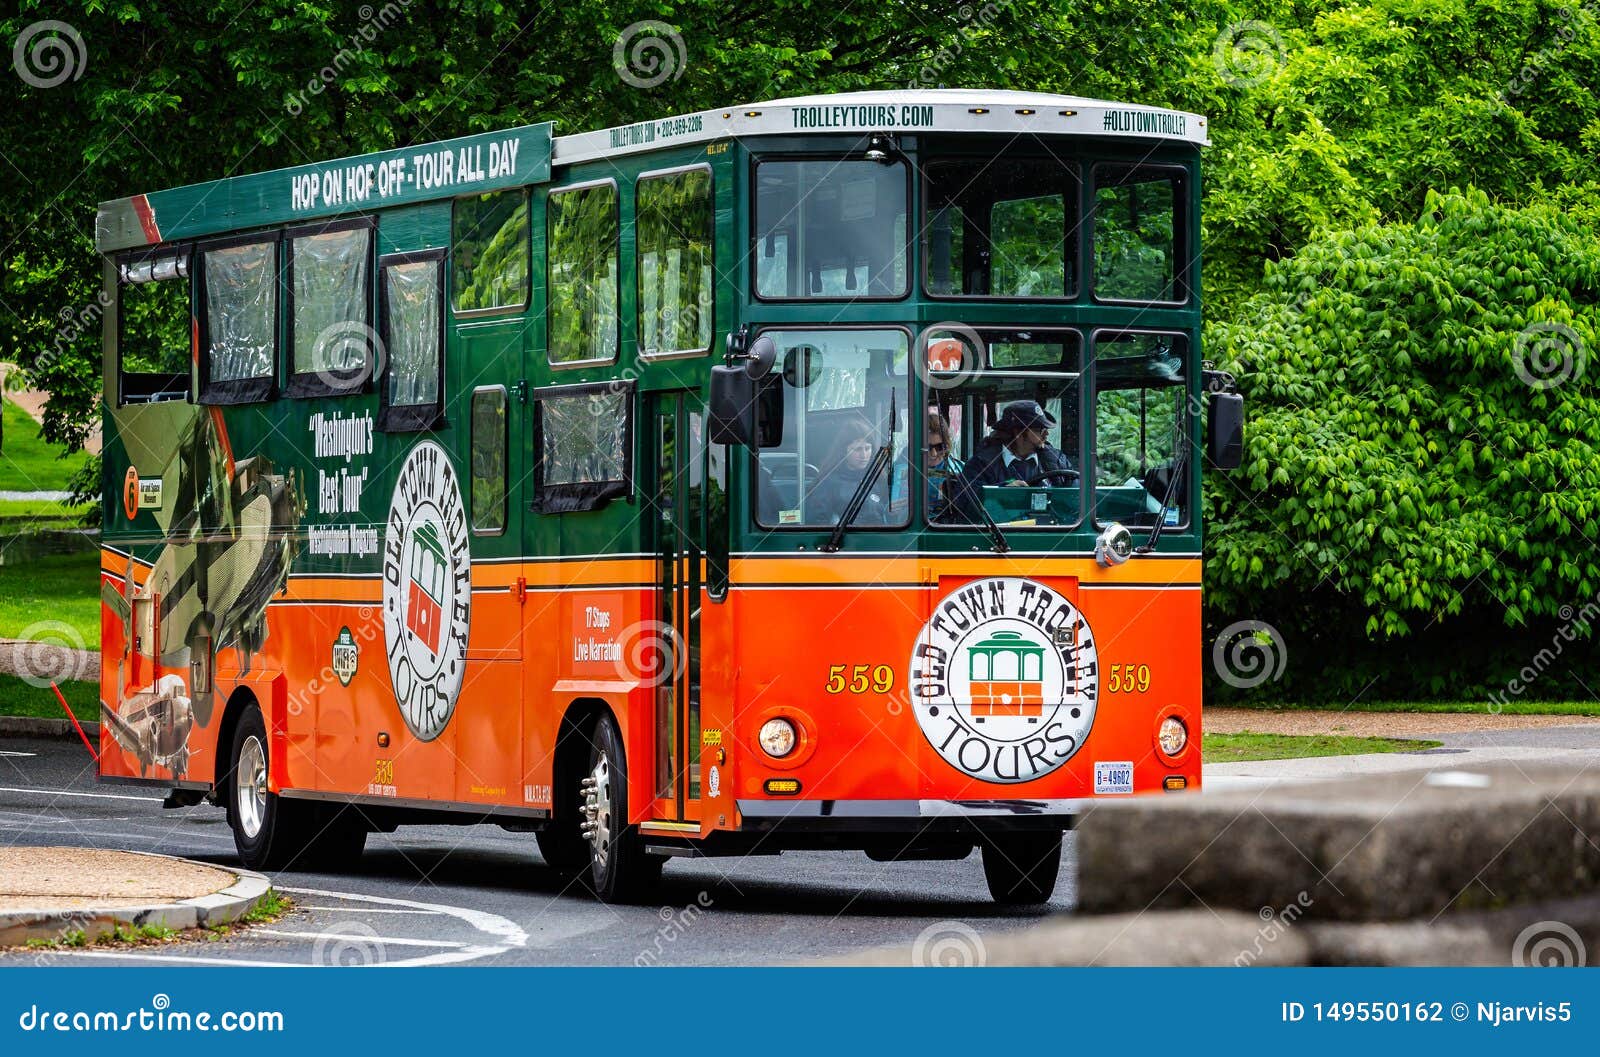 Hop On Hop Off Trolley Tour Bus In Washington DC, USA Editorial Image